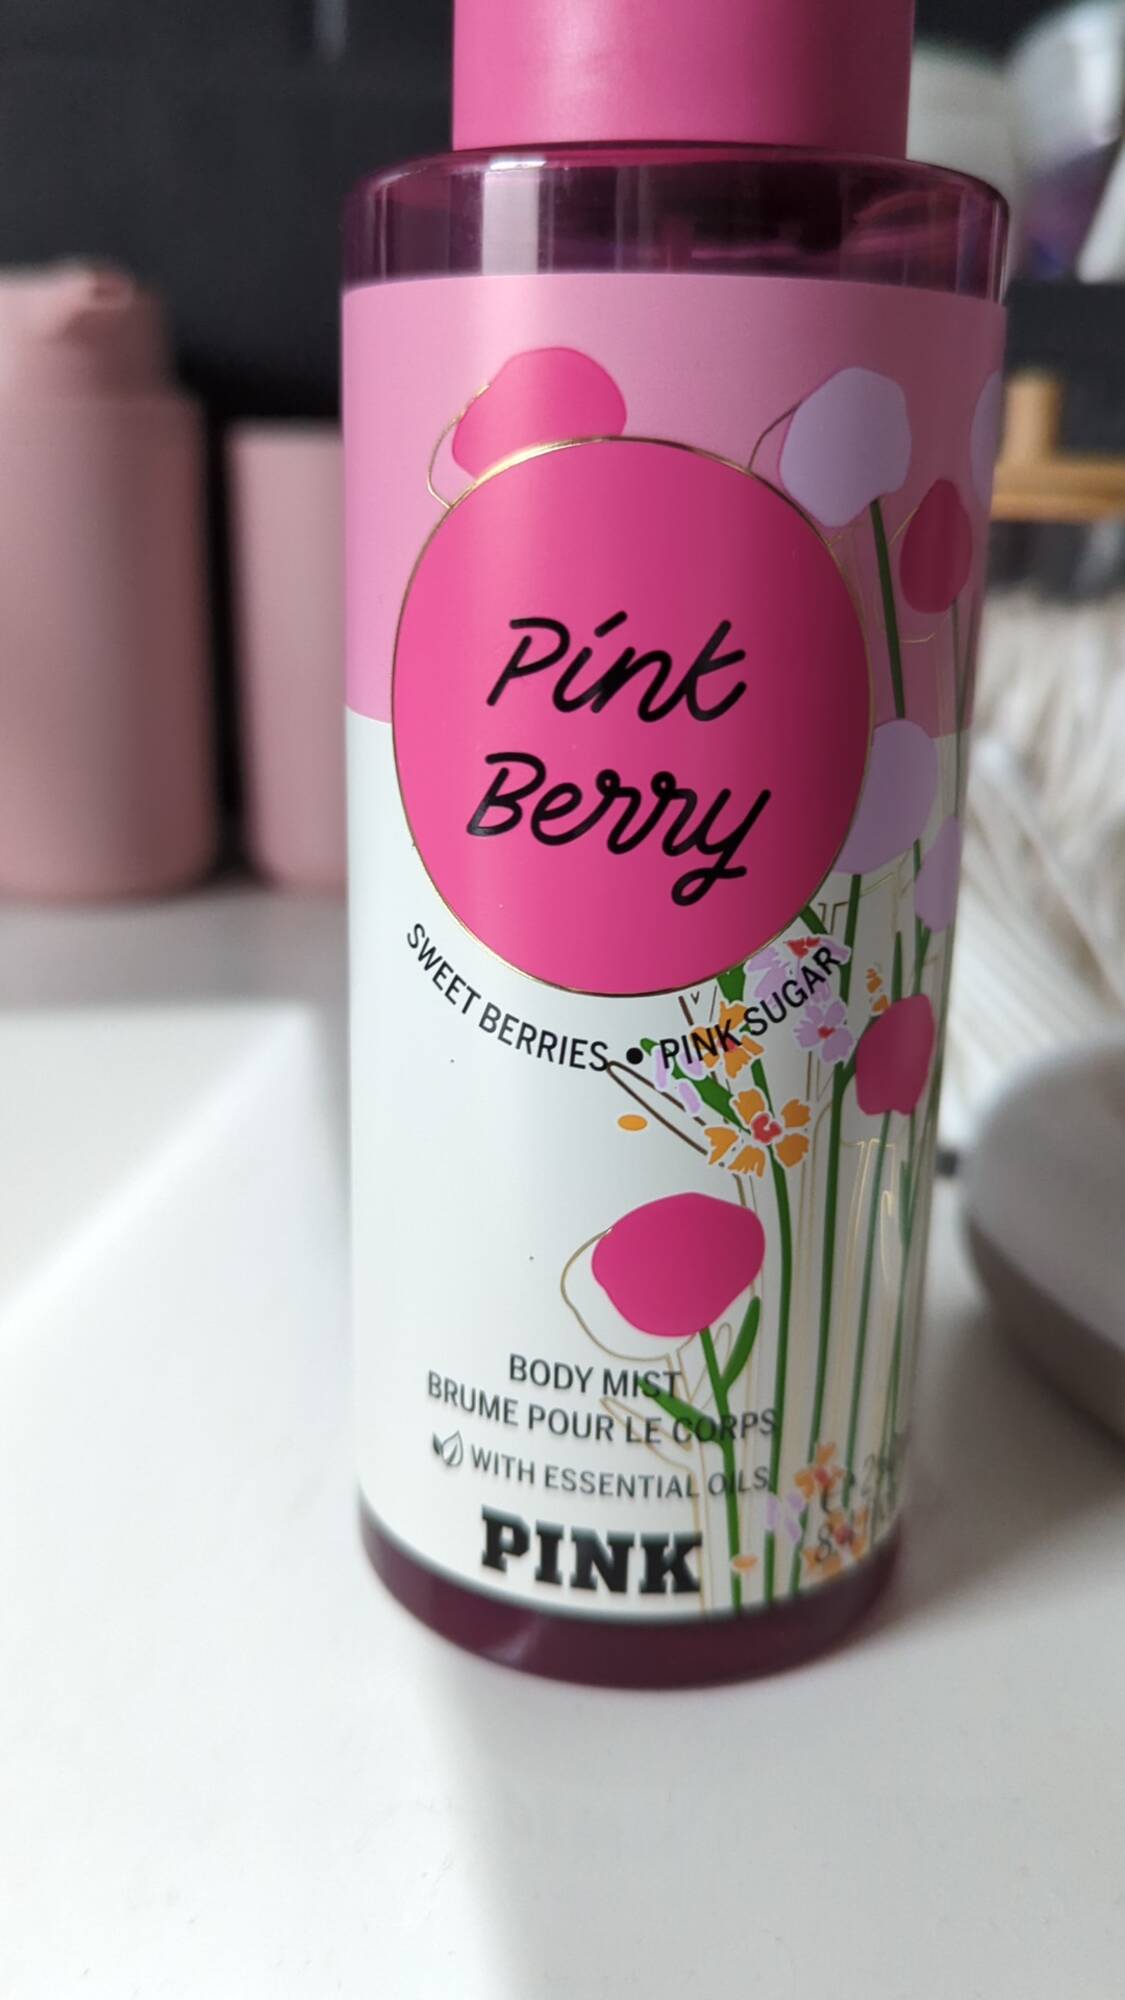 PINK - Pint berry - Brume pour le corps